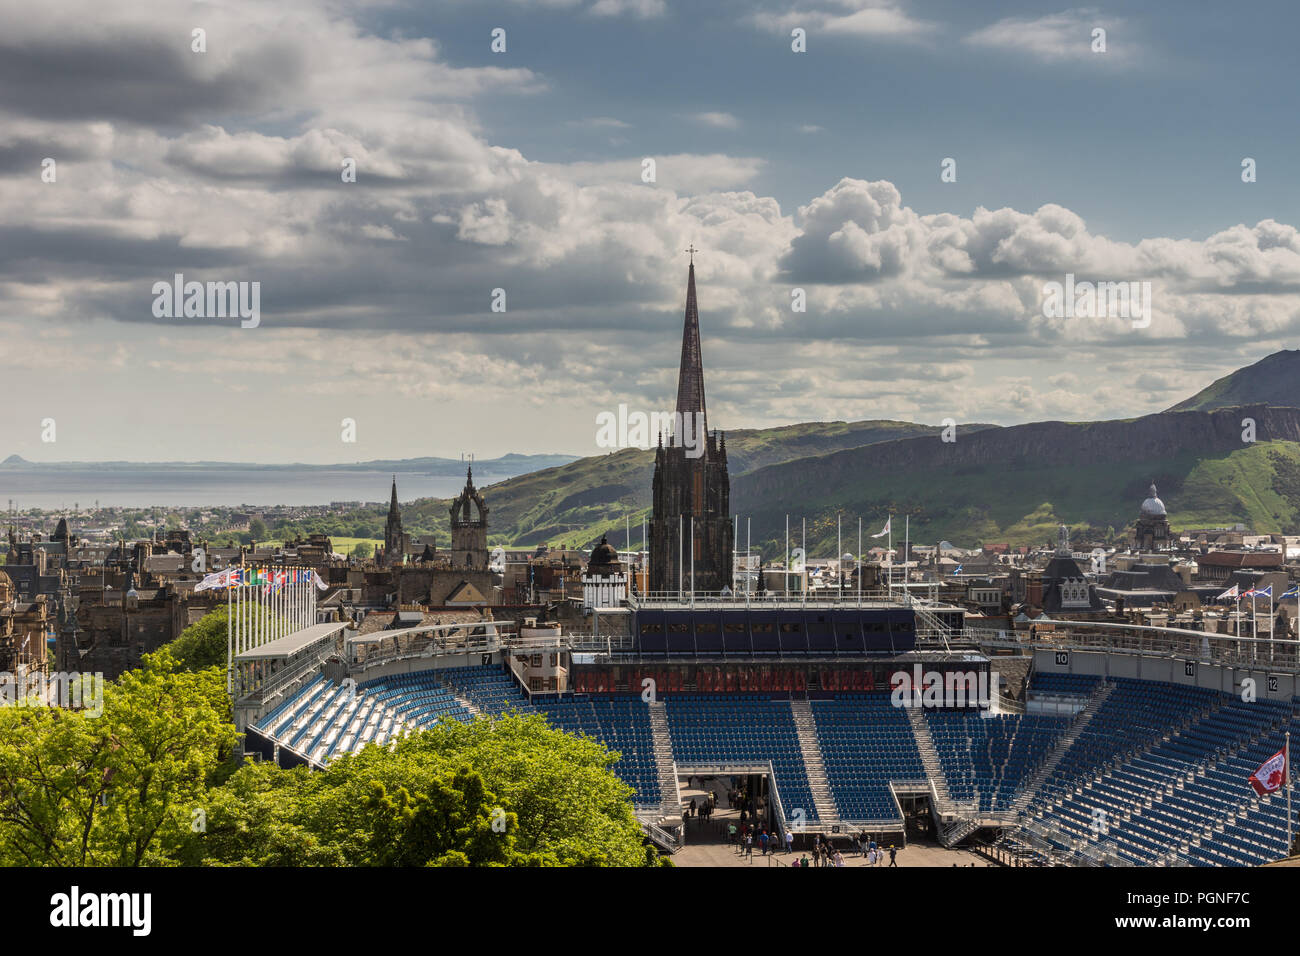 Edinburgh, Scotland, UK - June 14, 2012: Wide view from top of castle over esplanade show grounds towards Royal mile with towers and the sea in the di Stock Photo